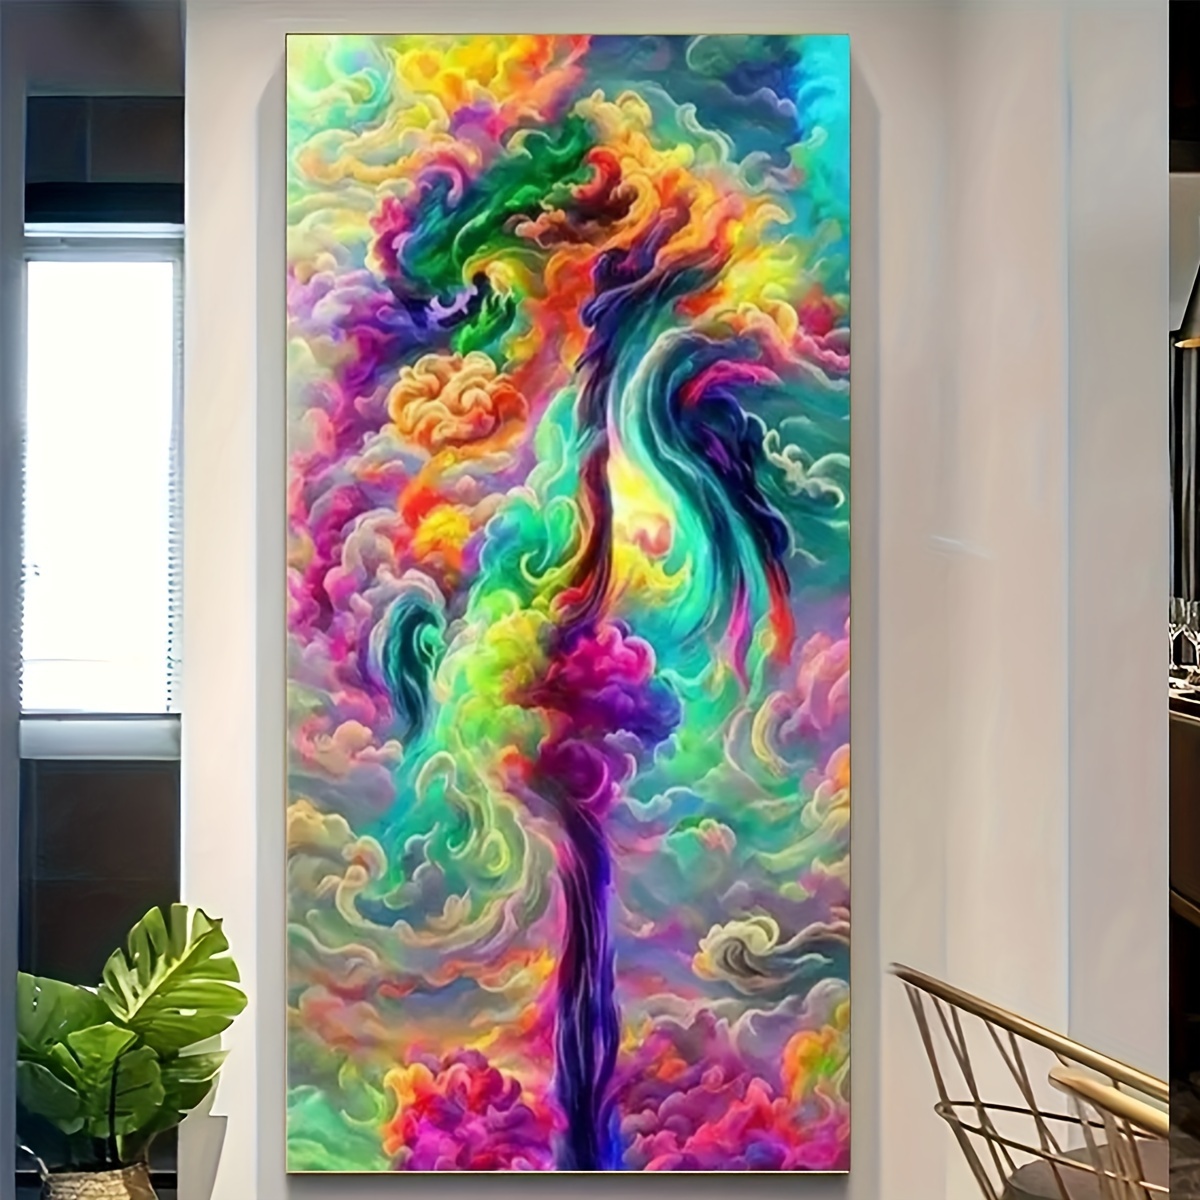 5D Large Diamond Painting Kits For Adults, New Diamond Painting Kits, 5D  DIY Large Artificial Diamond Painting Kits For Adutls, 40x70cm/15.75x27.56in